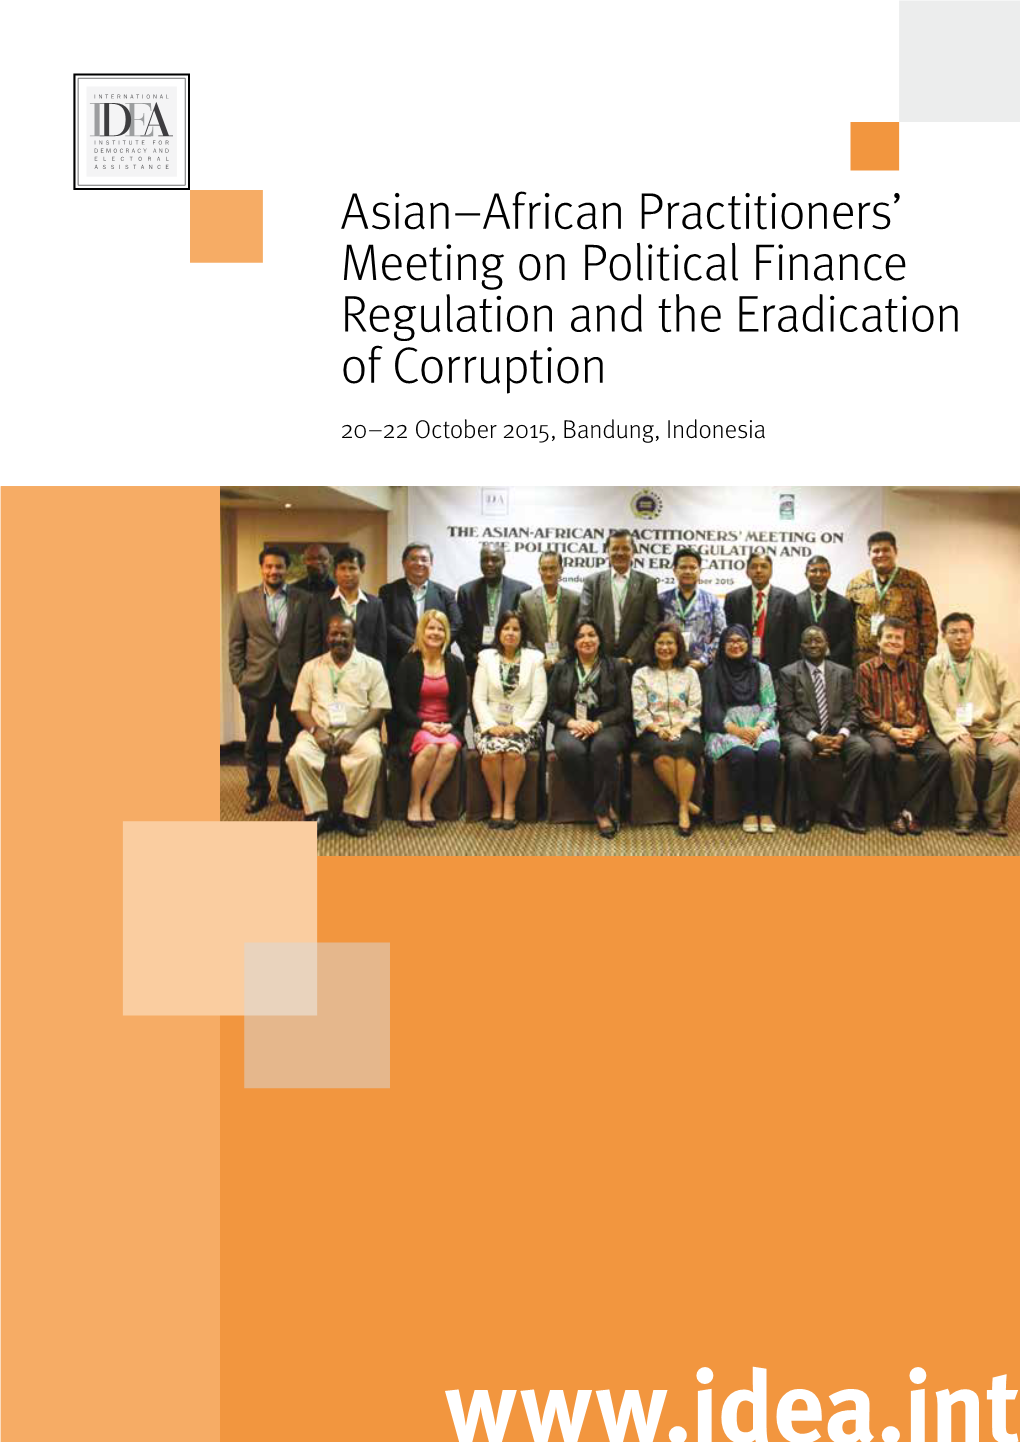 Asian-African Practitioners' Meeting on Political Finance Regulation and The